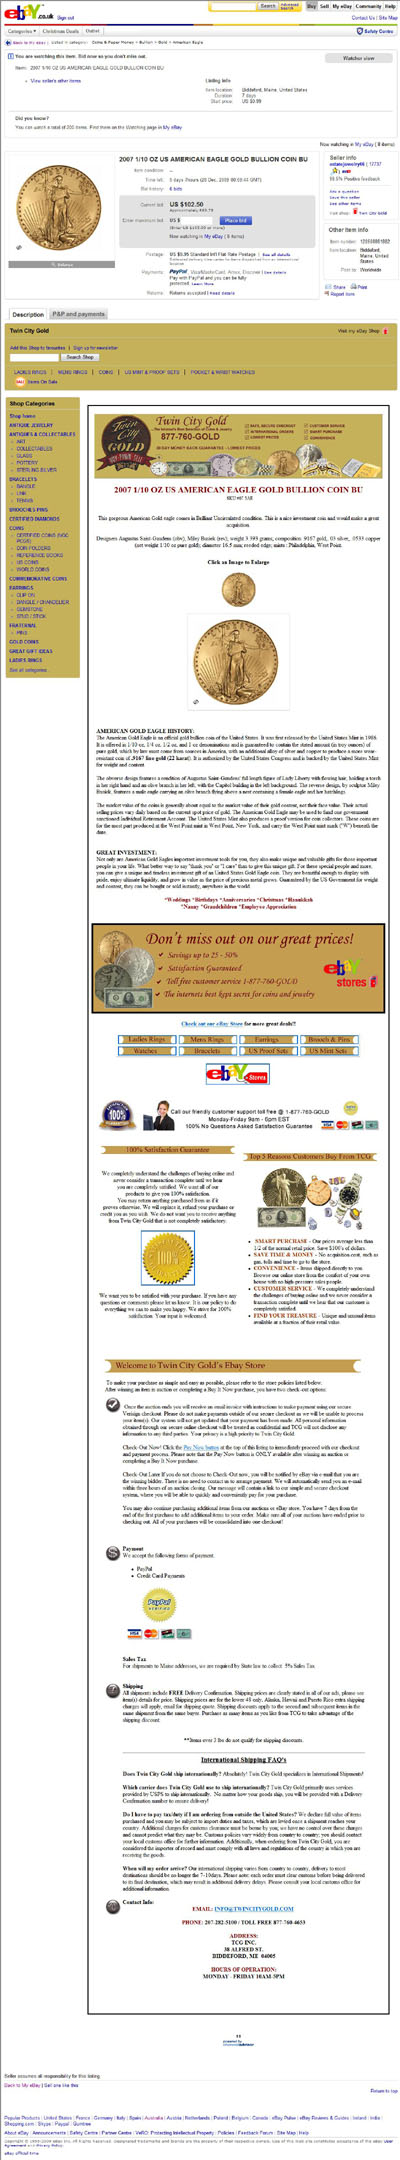 EstateJewelry66 Twin City Gold's eBay Listing using  Our 2007 US Gold Eagle Image